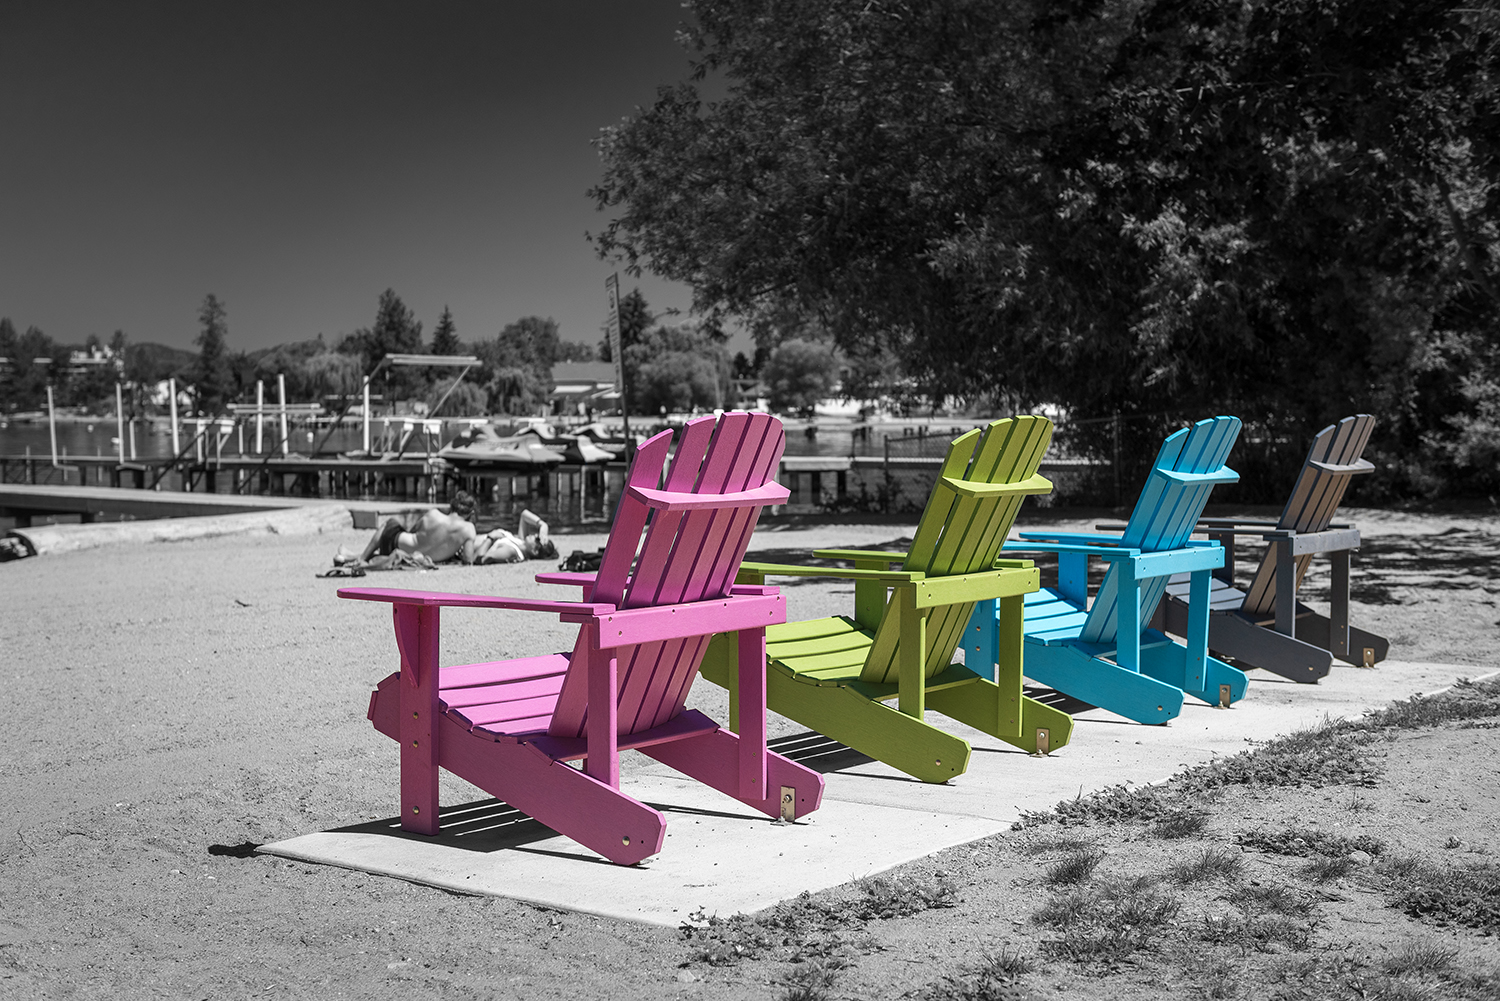 Kamloops Abstract black and white photo with colorful beach chairs